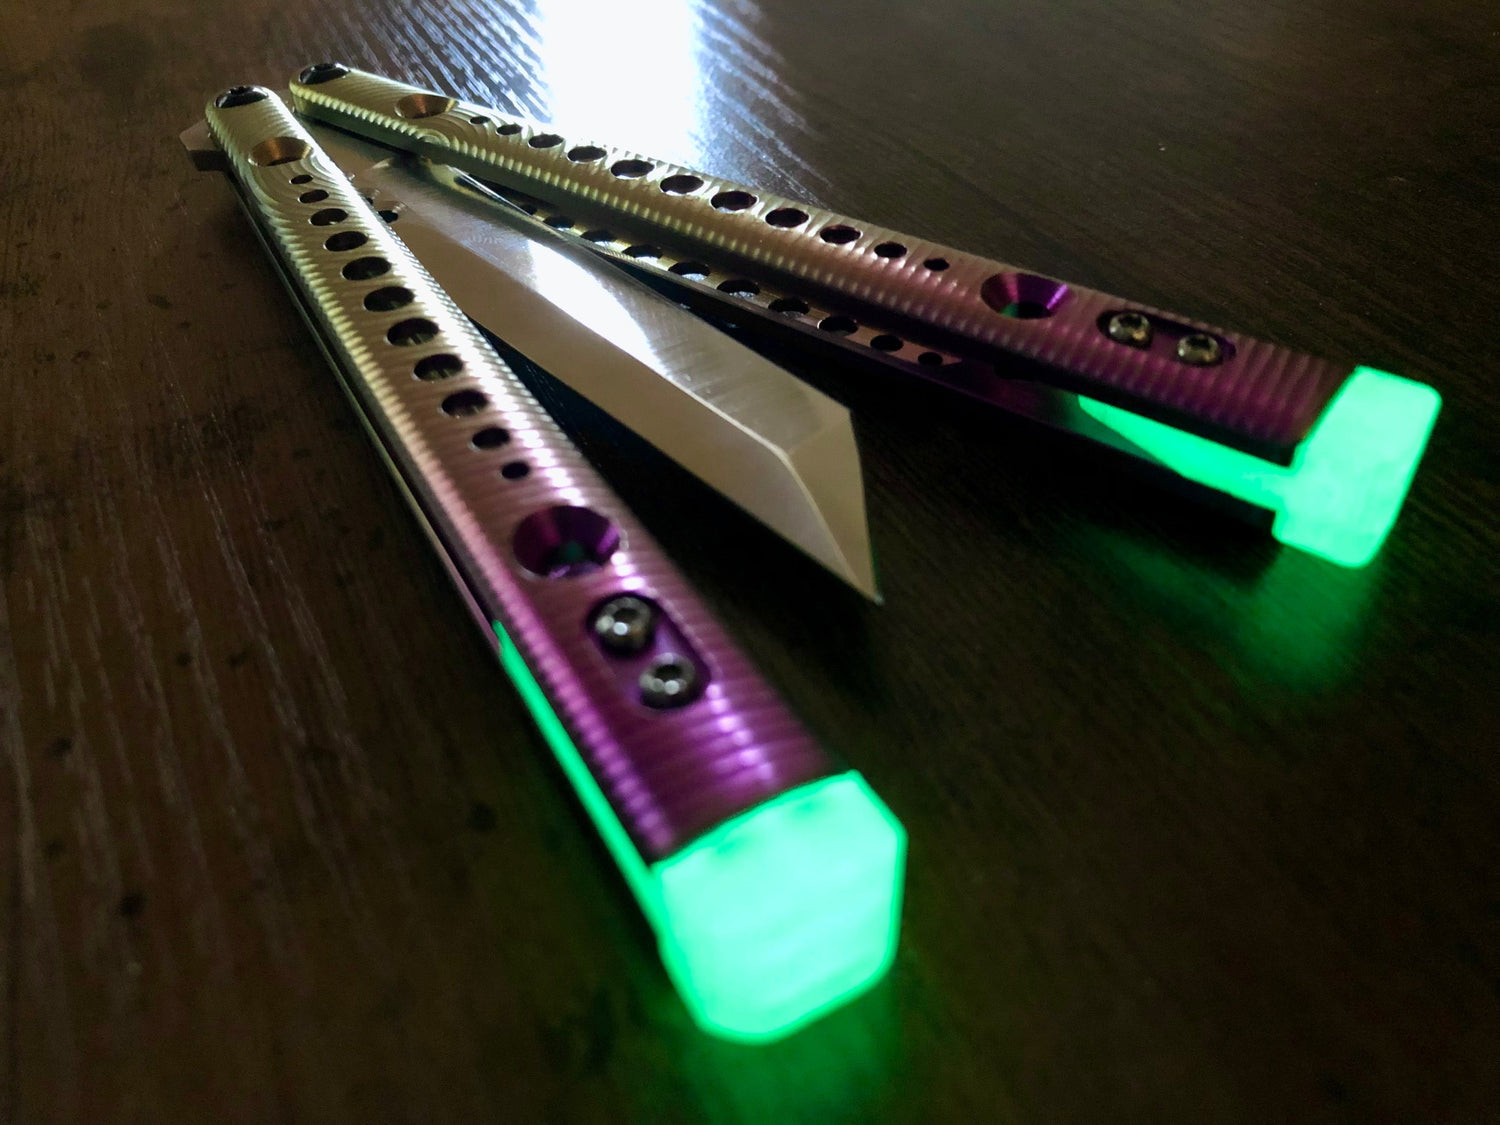 Blade runner systems, bladerunnersystems, BRS replicant, BRS, BRS balisong, BRS butterfly, replicant, BRS rep, alpha Beast, BRS alpha beast, Chab, BRS Chab, rep spacers, rep mods, replicant spacers, replicant mods, BRS rep spacers, BRS rep mods, BRS replicant liners, BRS replicant scales, brs mod, replicant extension spacers, aloha beast, BRS tibones, brs barebones